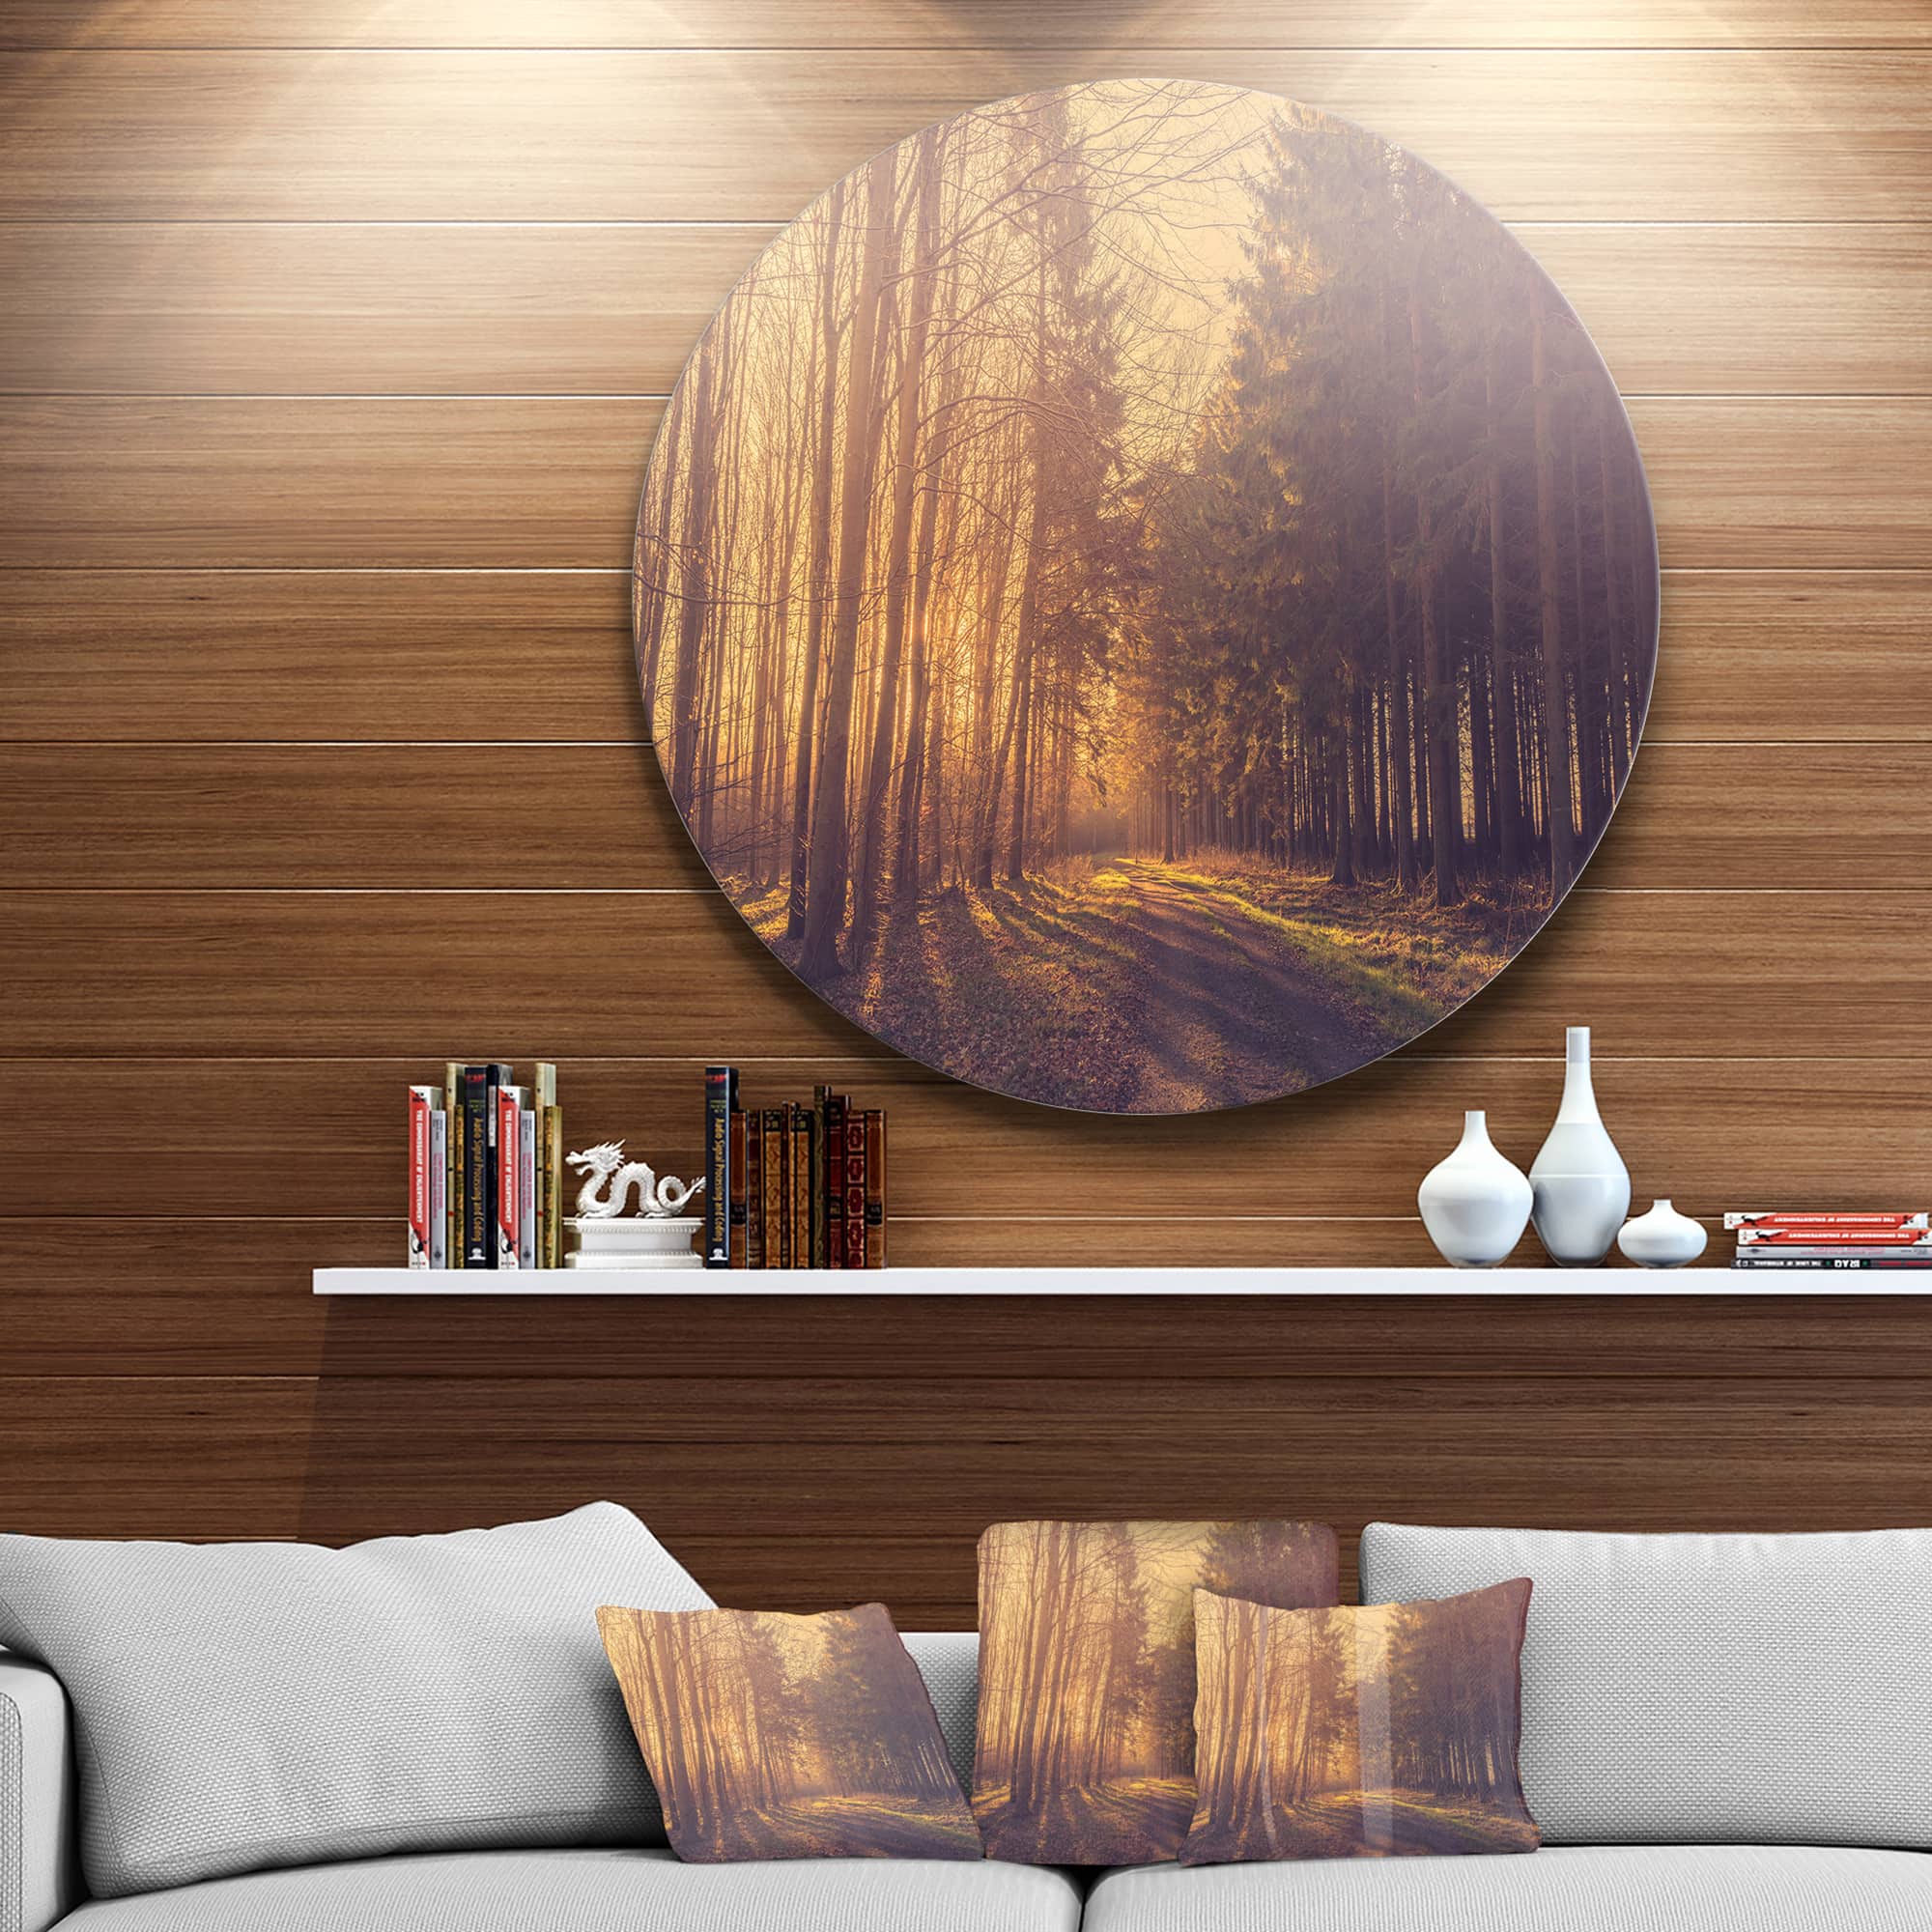 Designart - Pine Tree Forest by Road&#x27; Landscape Photo Circle Metal Wall Art